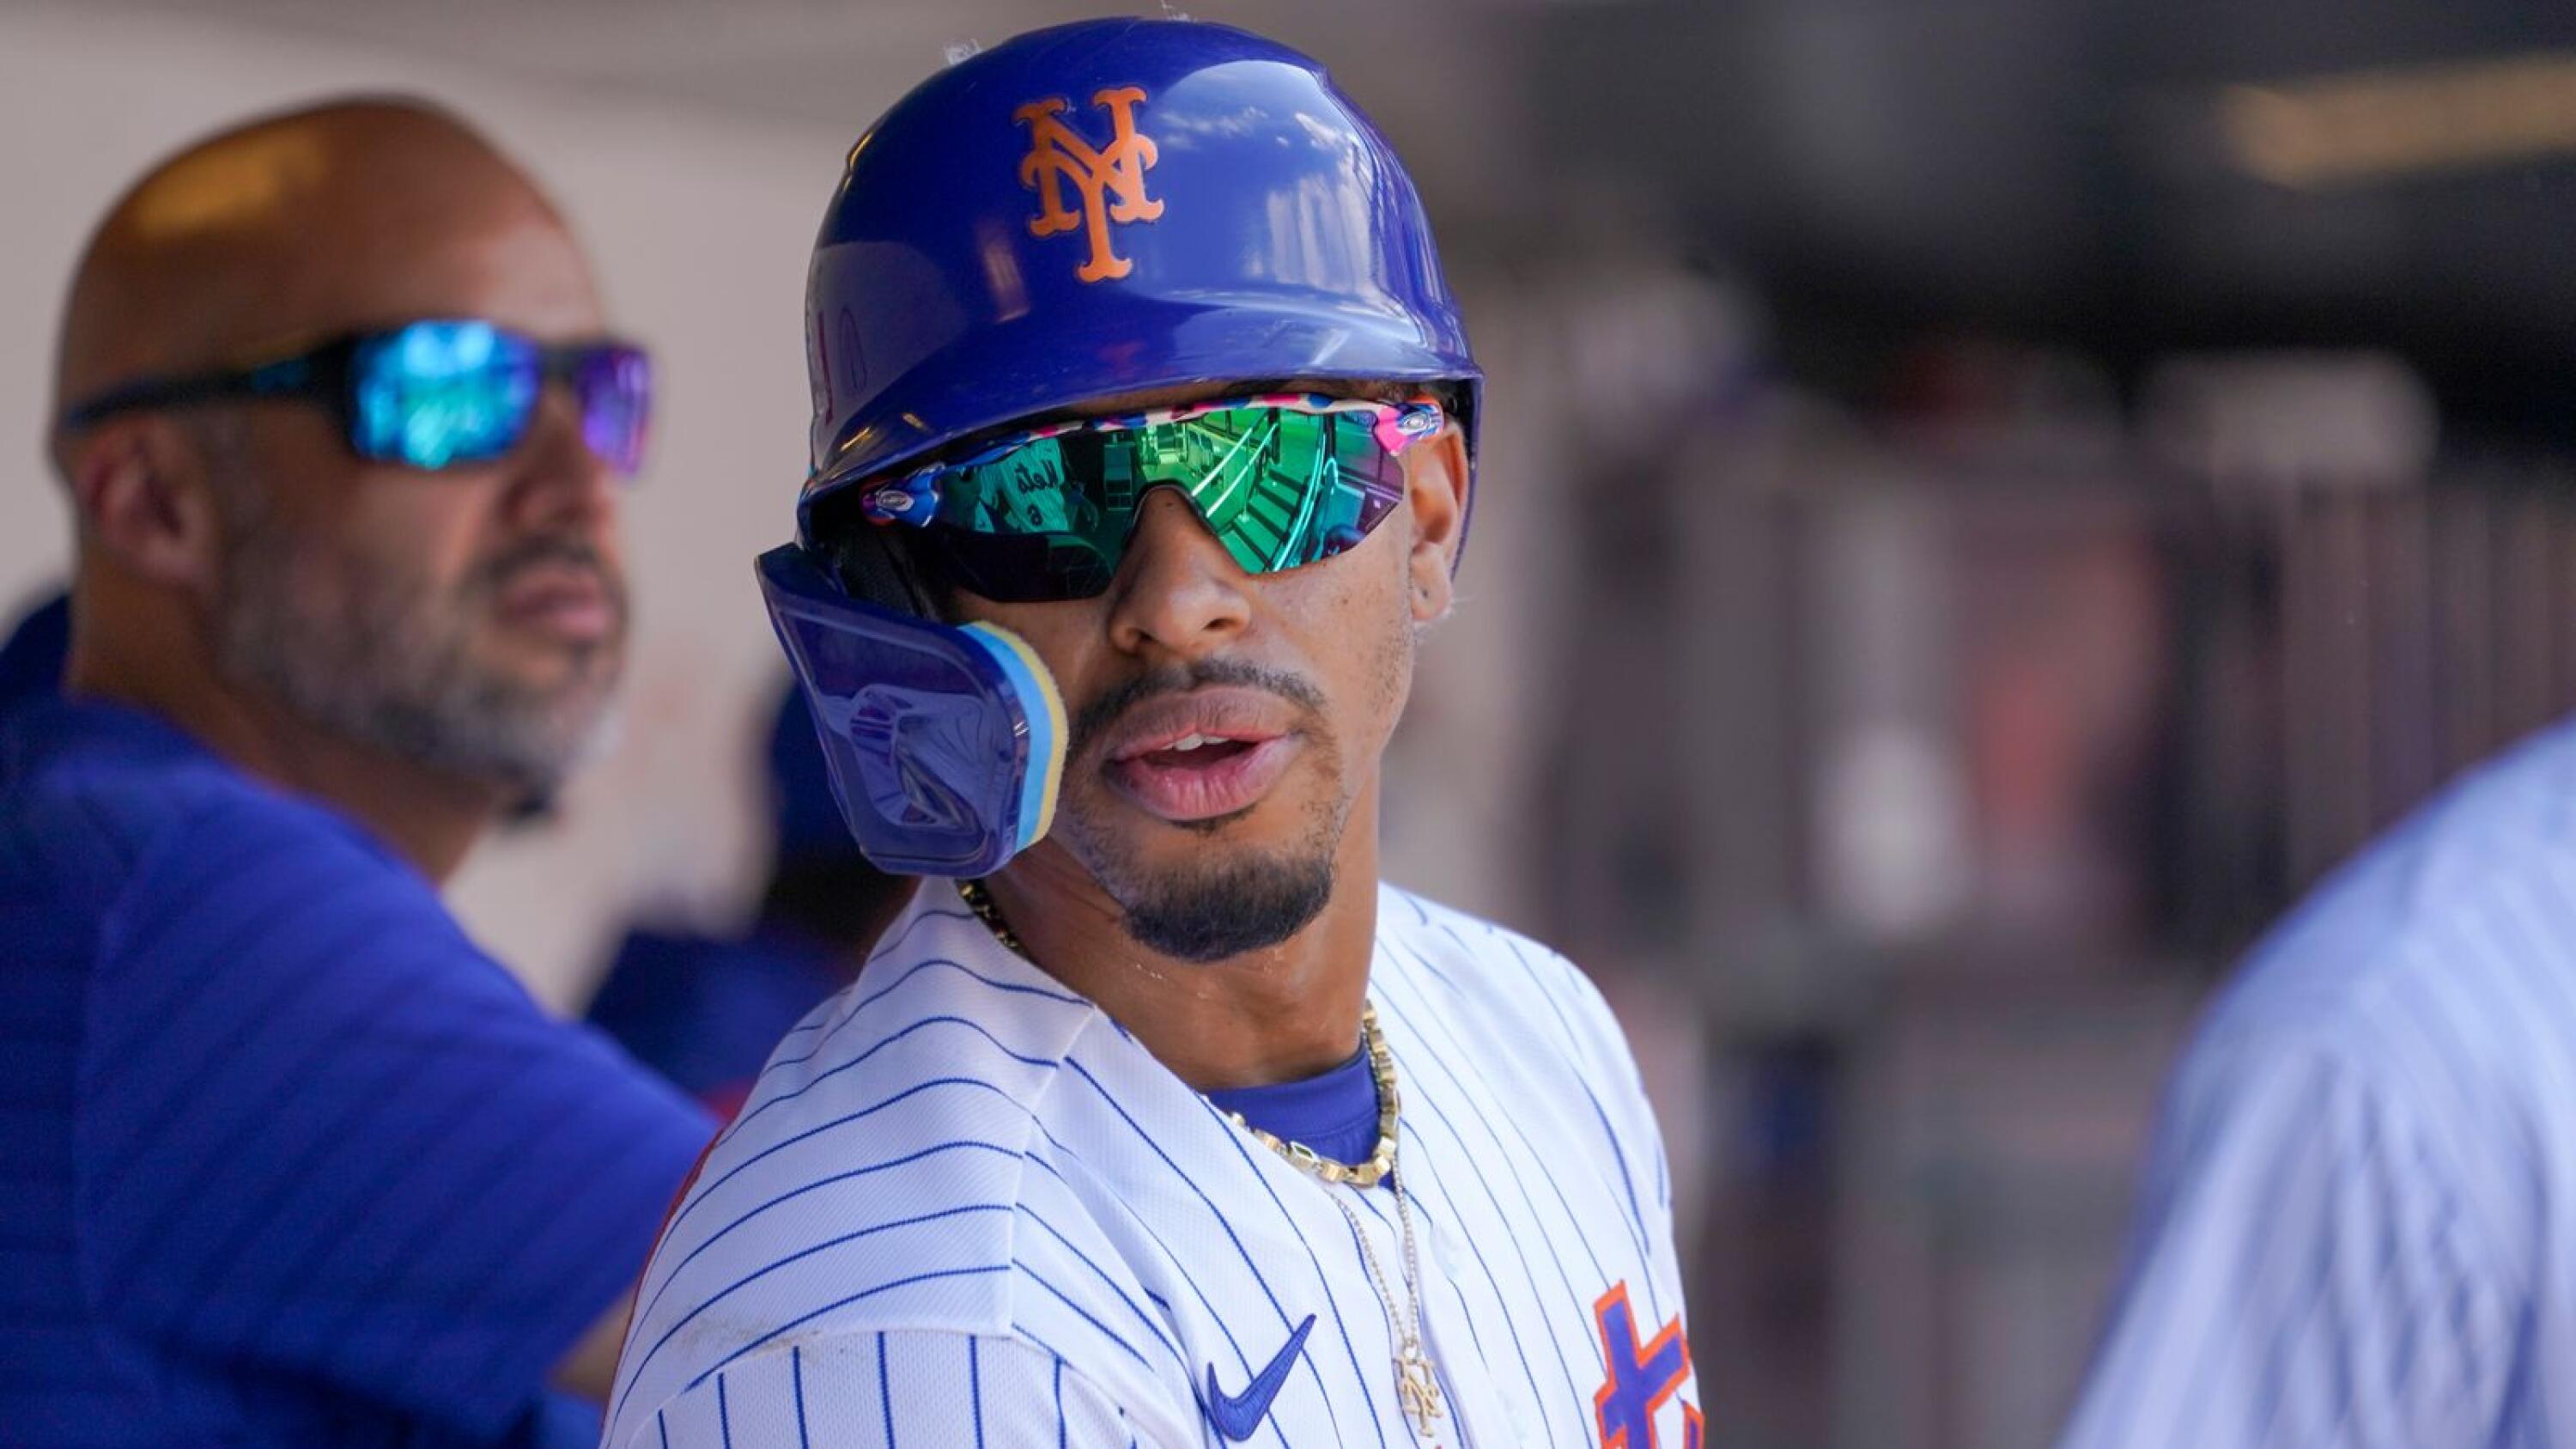 Honoring Francisco Lindor, Pete Alonso inspired glasses, and